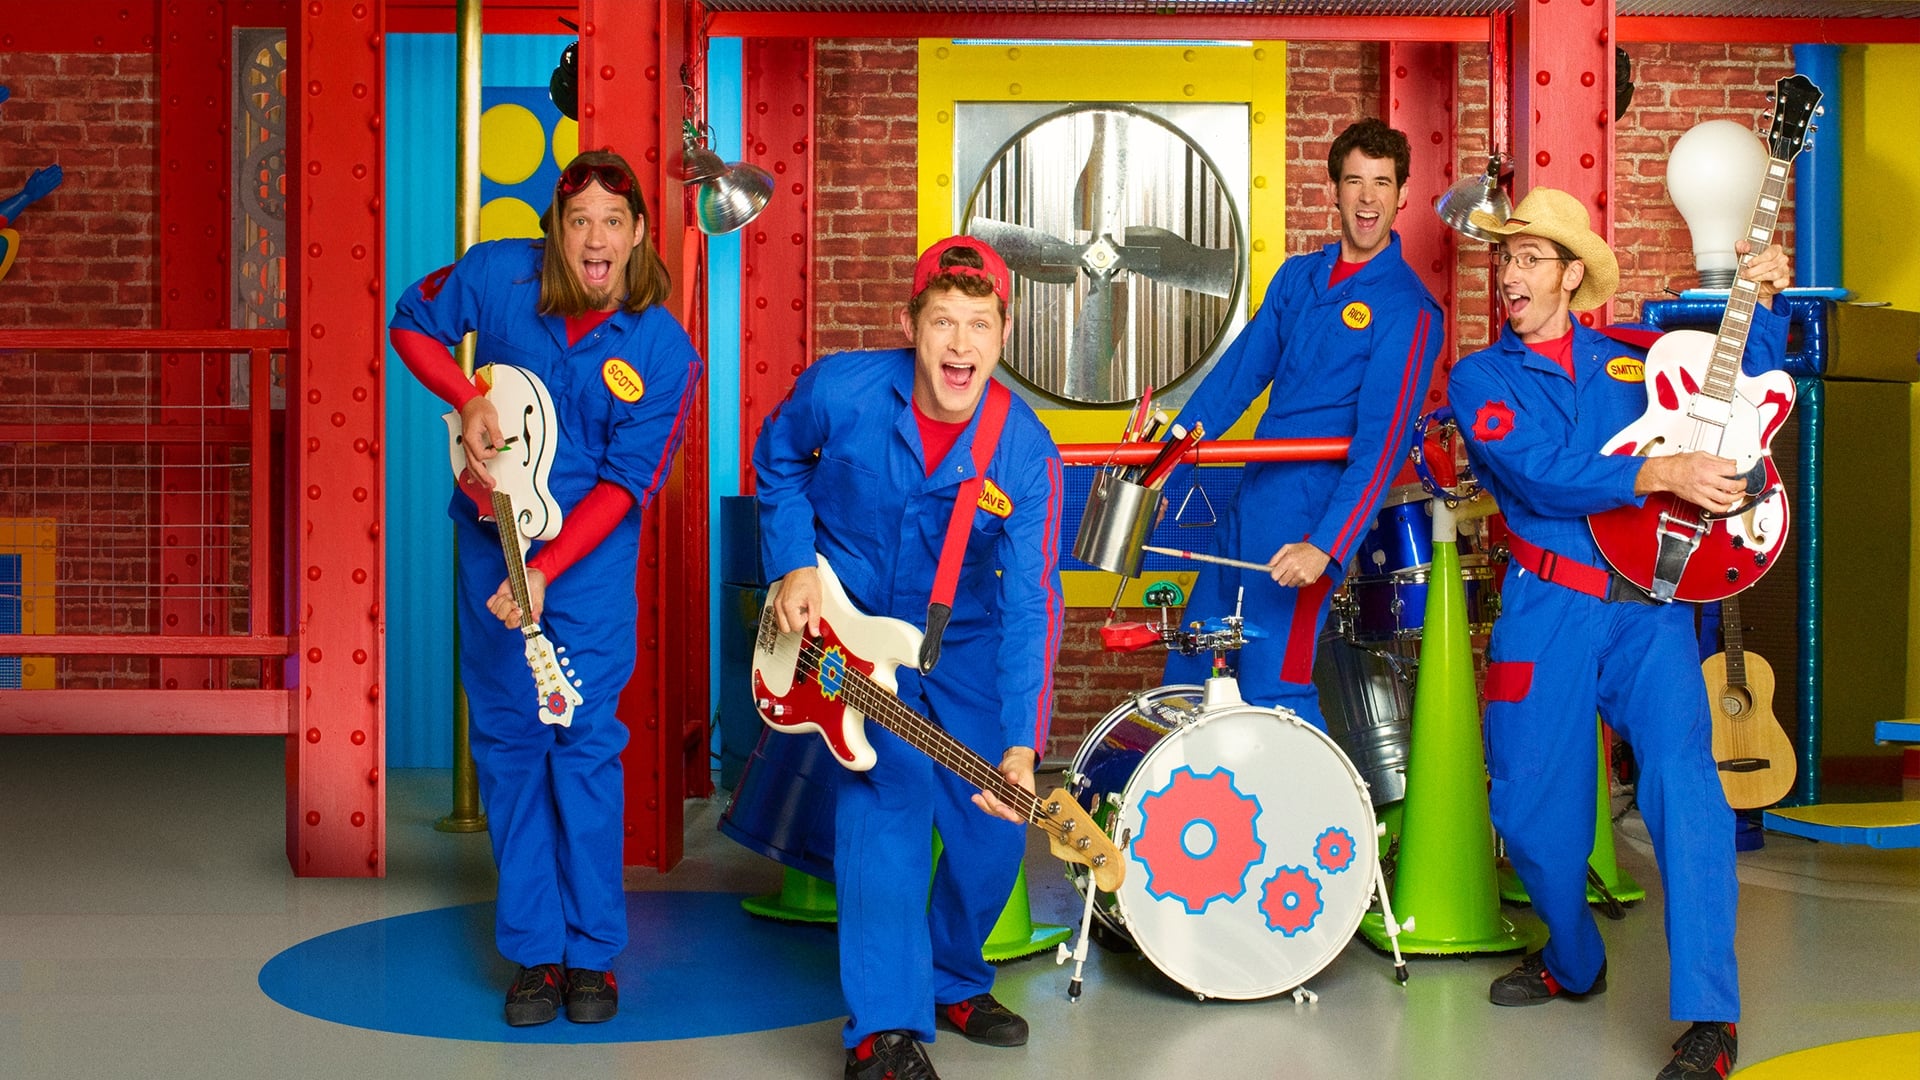 The last imagination. Imagination Movers. Imagination Movers 2004. Disney imagination Movers logo. Imagination Movers 123movies.